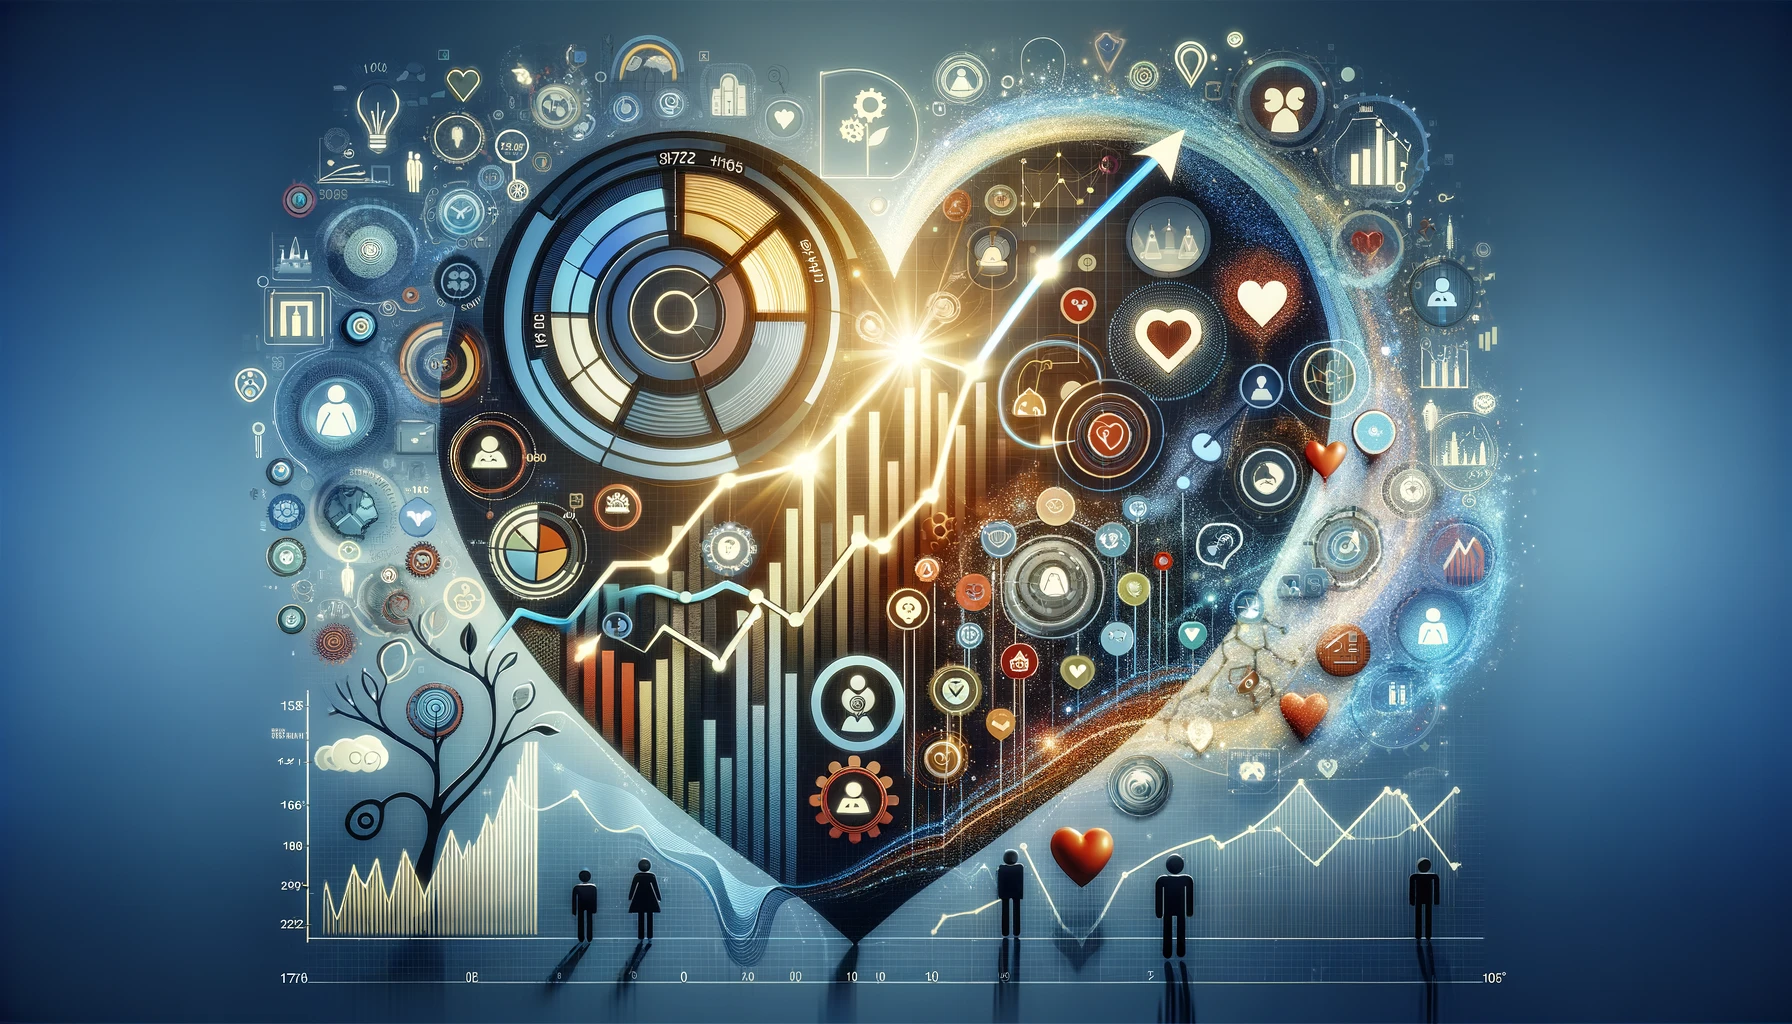 Abstract visualization of customer retention metrics featuring pie charts, line graphs, user icons, and symbolic elements of growth and loyalty such as trees and hearts, set within a corporate framework.